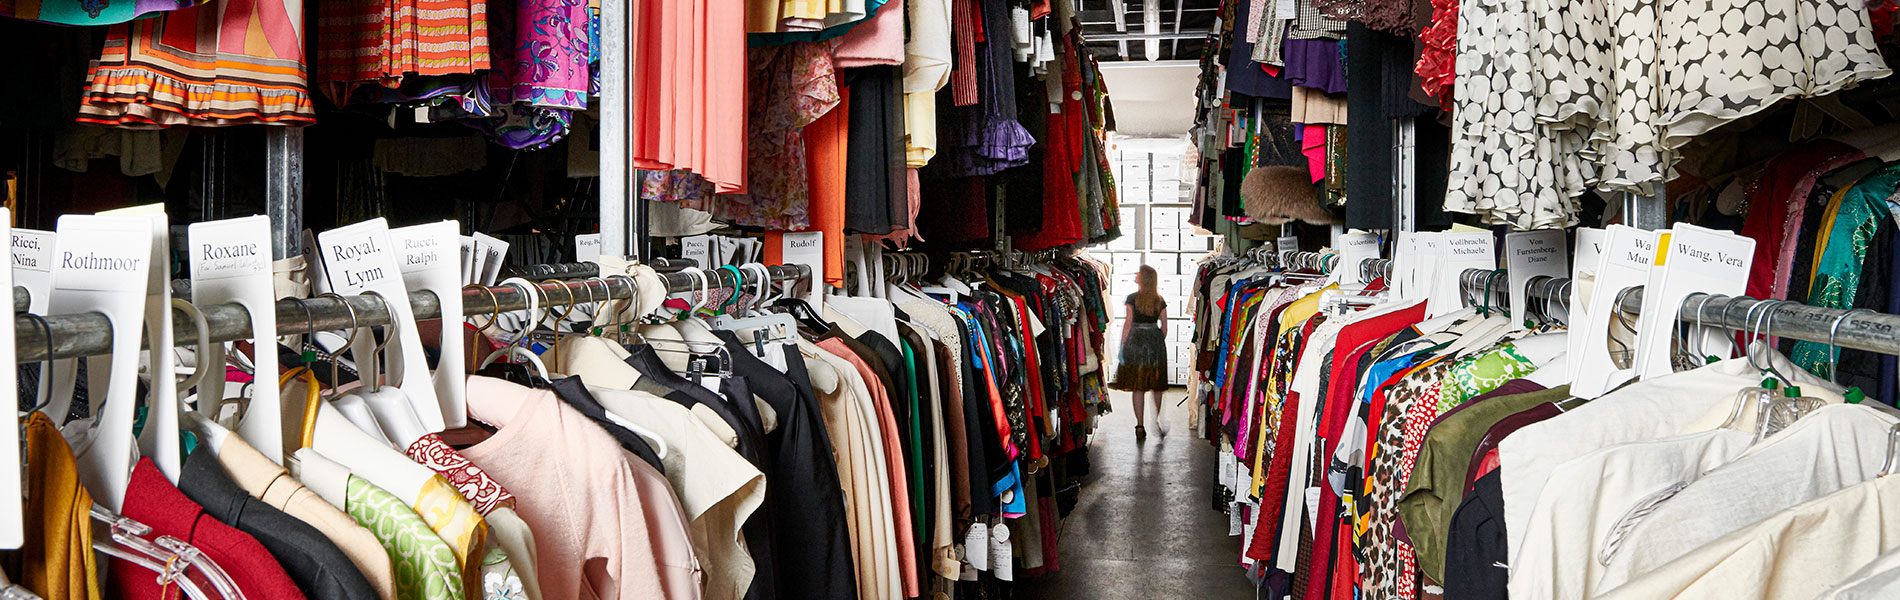 Figure walking down an aisle of clothing in the Texas Fashion Collection storage facility